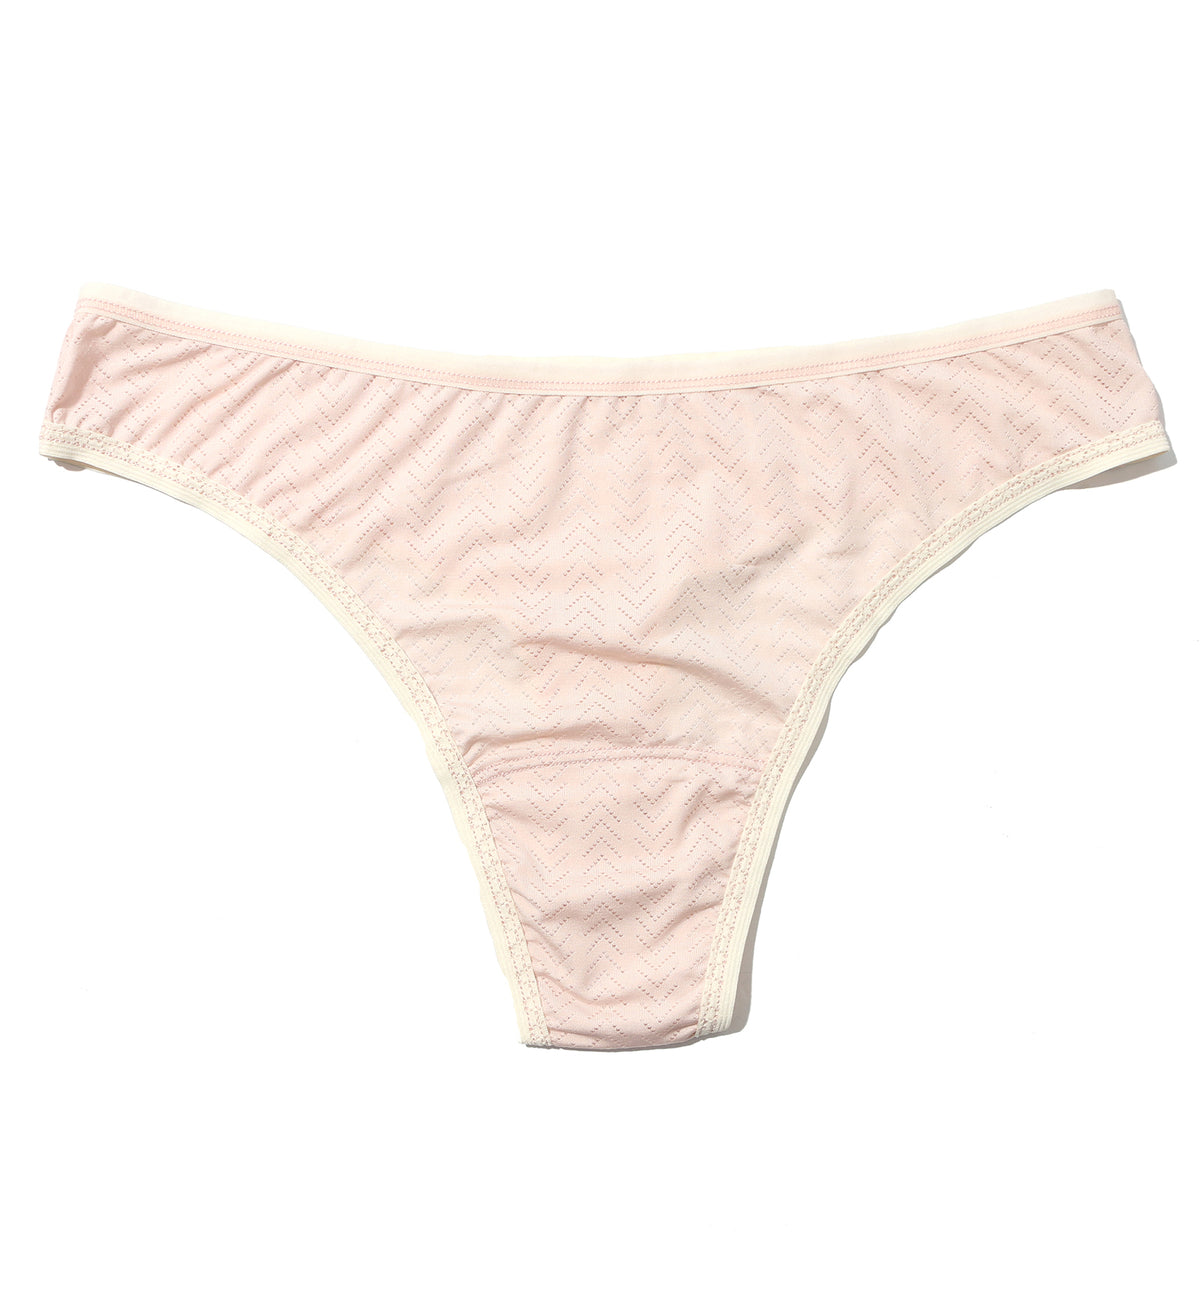 Hanky Panky MoveCalm Natural Rise Thong (2P1664),XS,Pearl/Marshmallow - Pearl/Marshmallow,XS